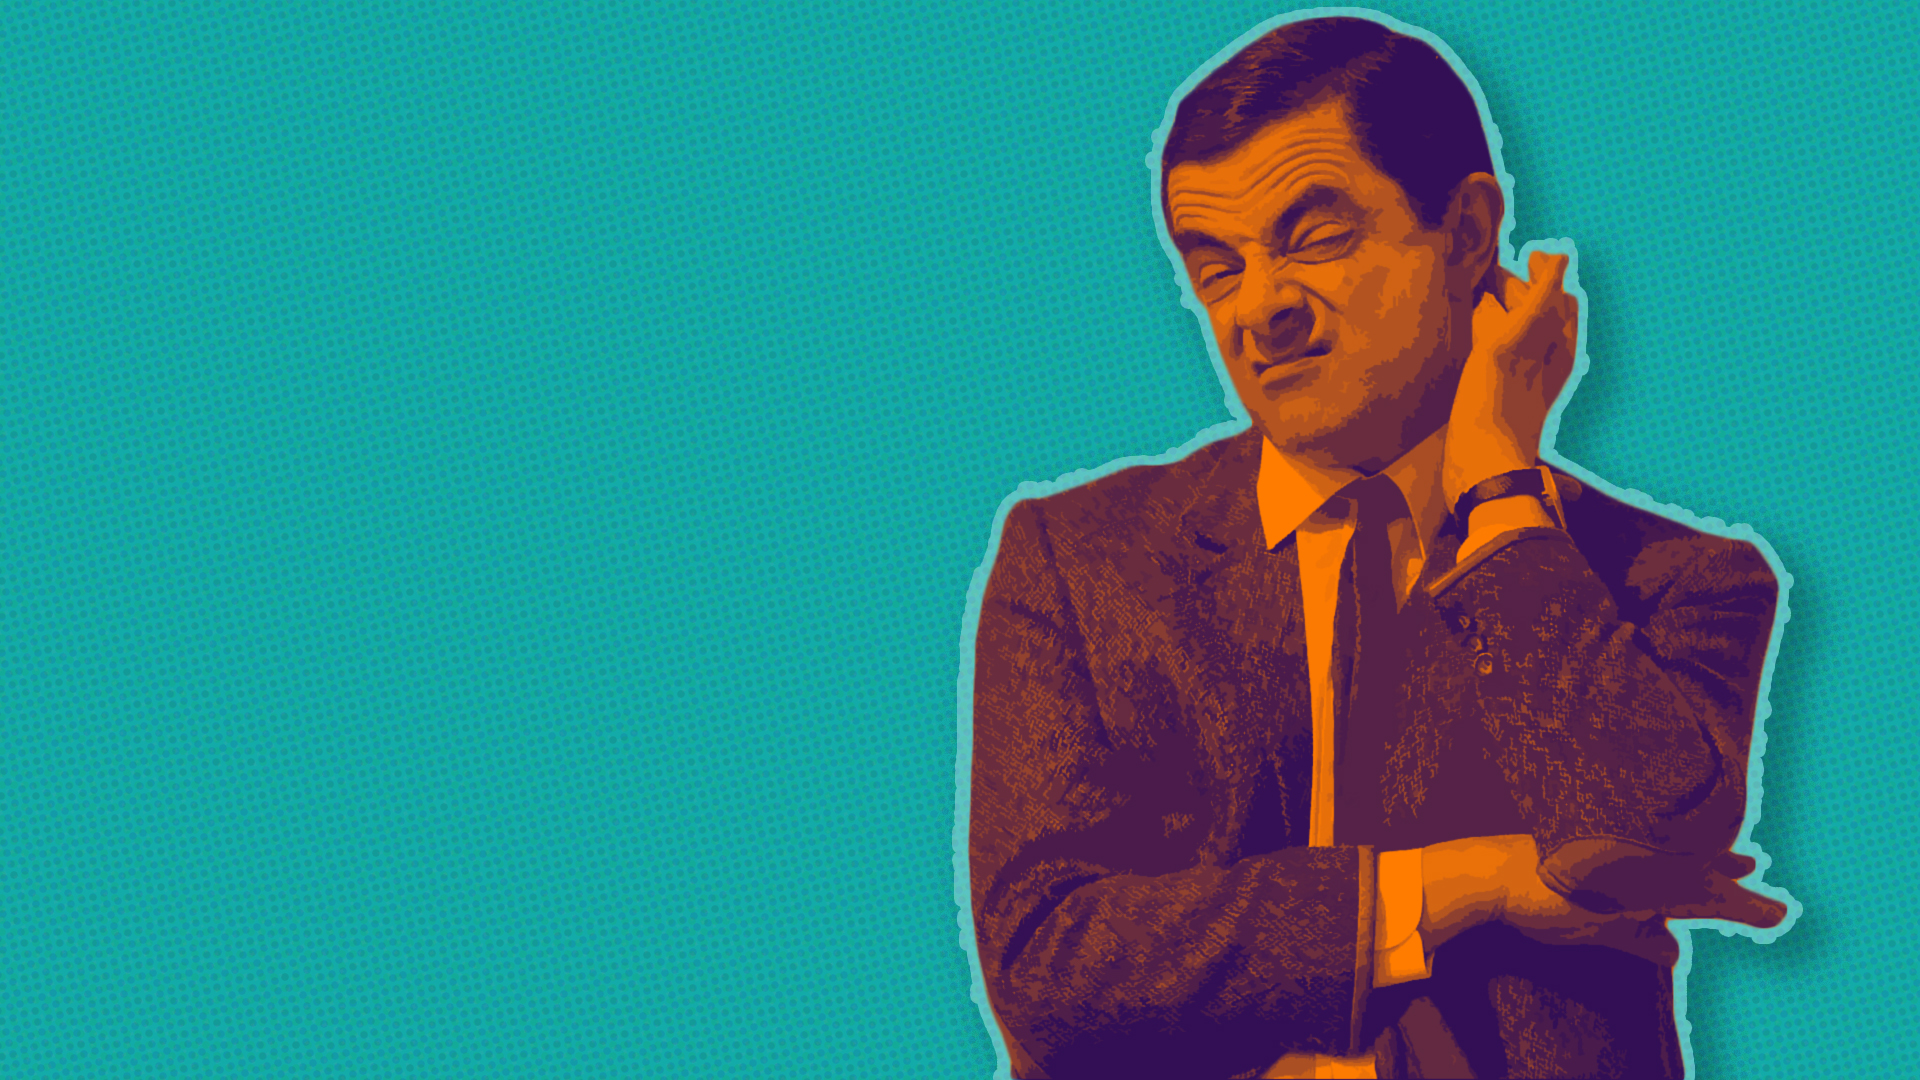 Mr Bean’s Limited Potential On Radio